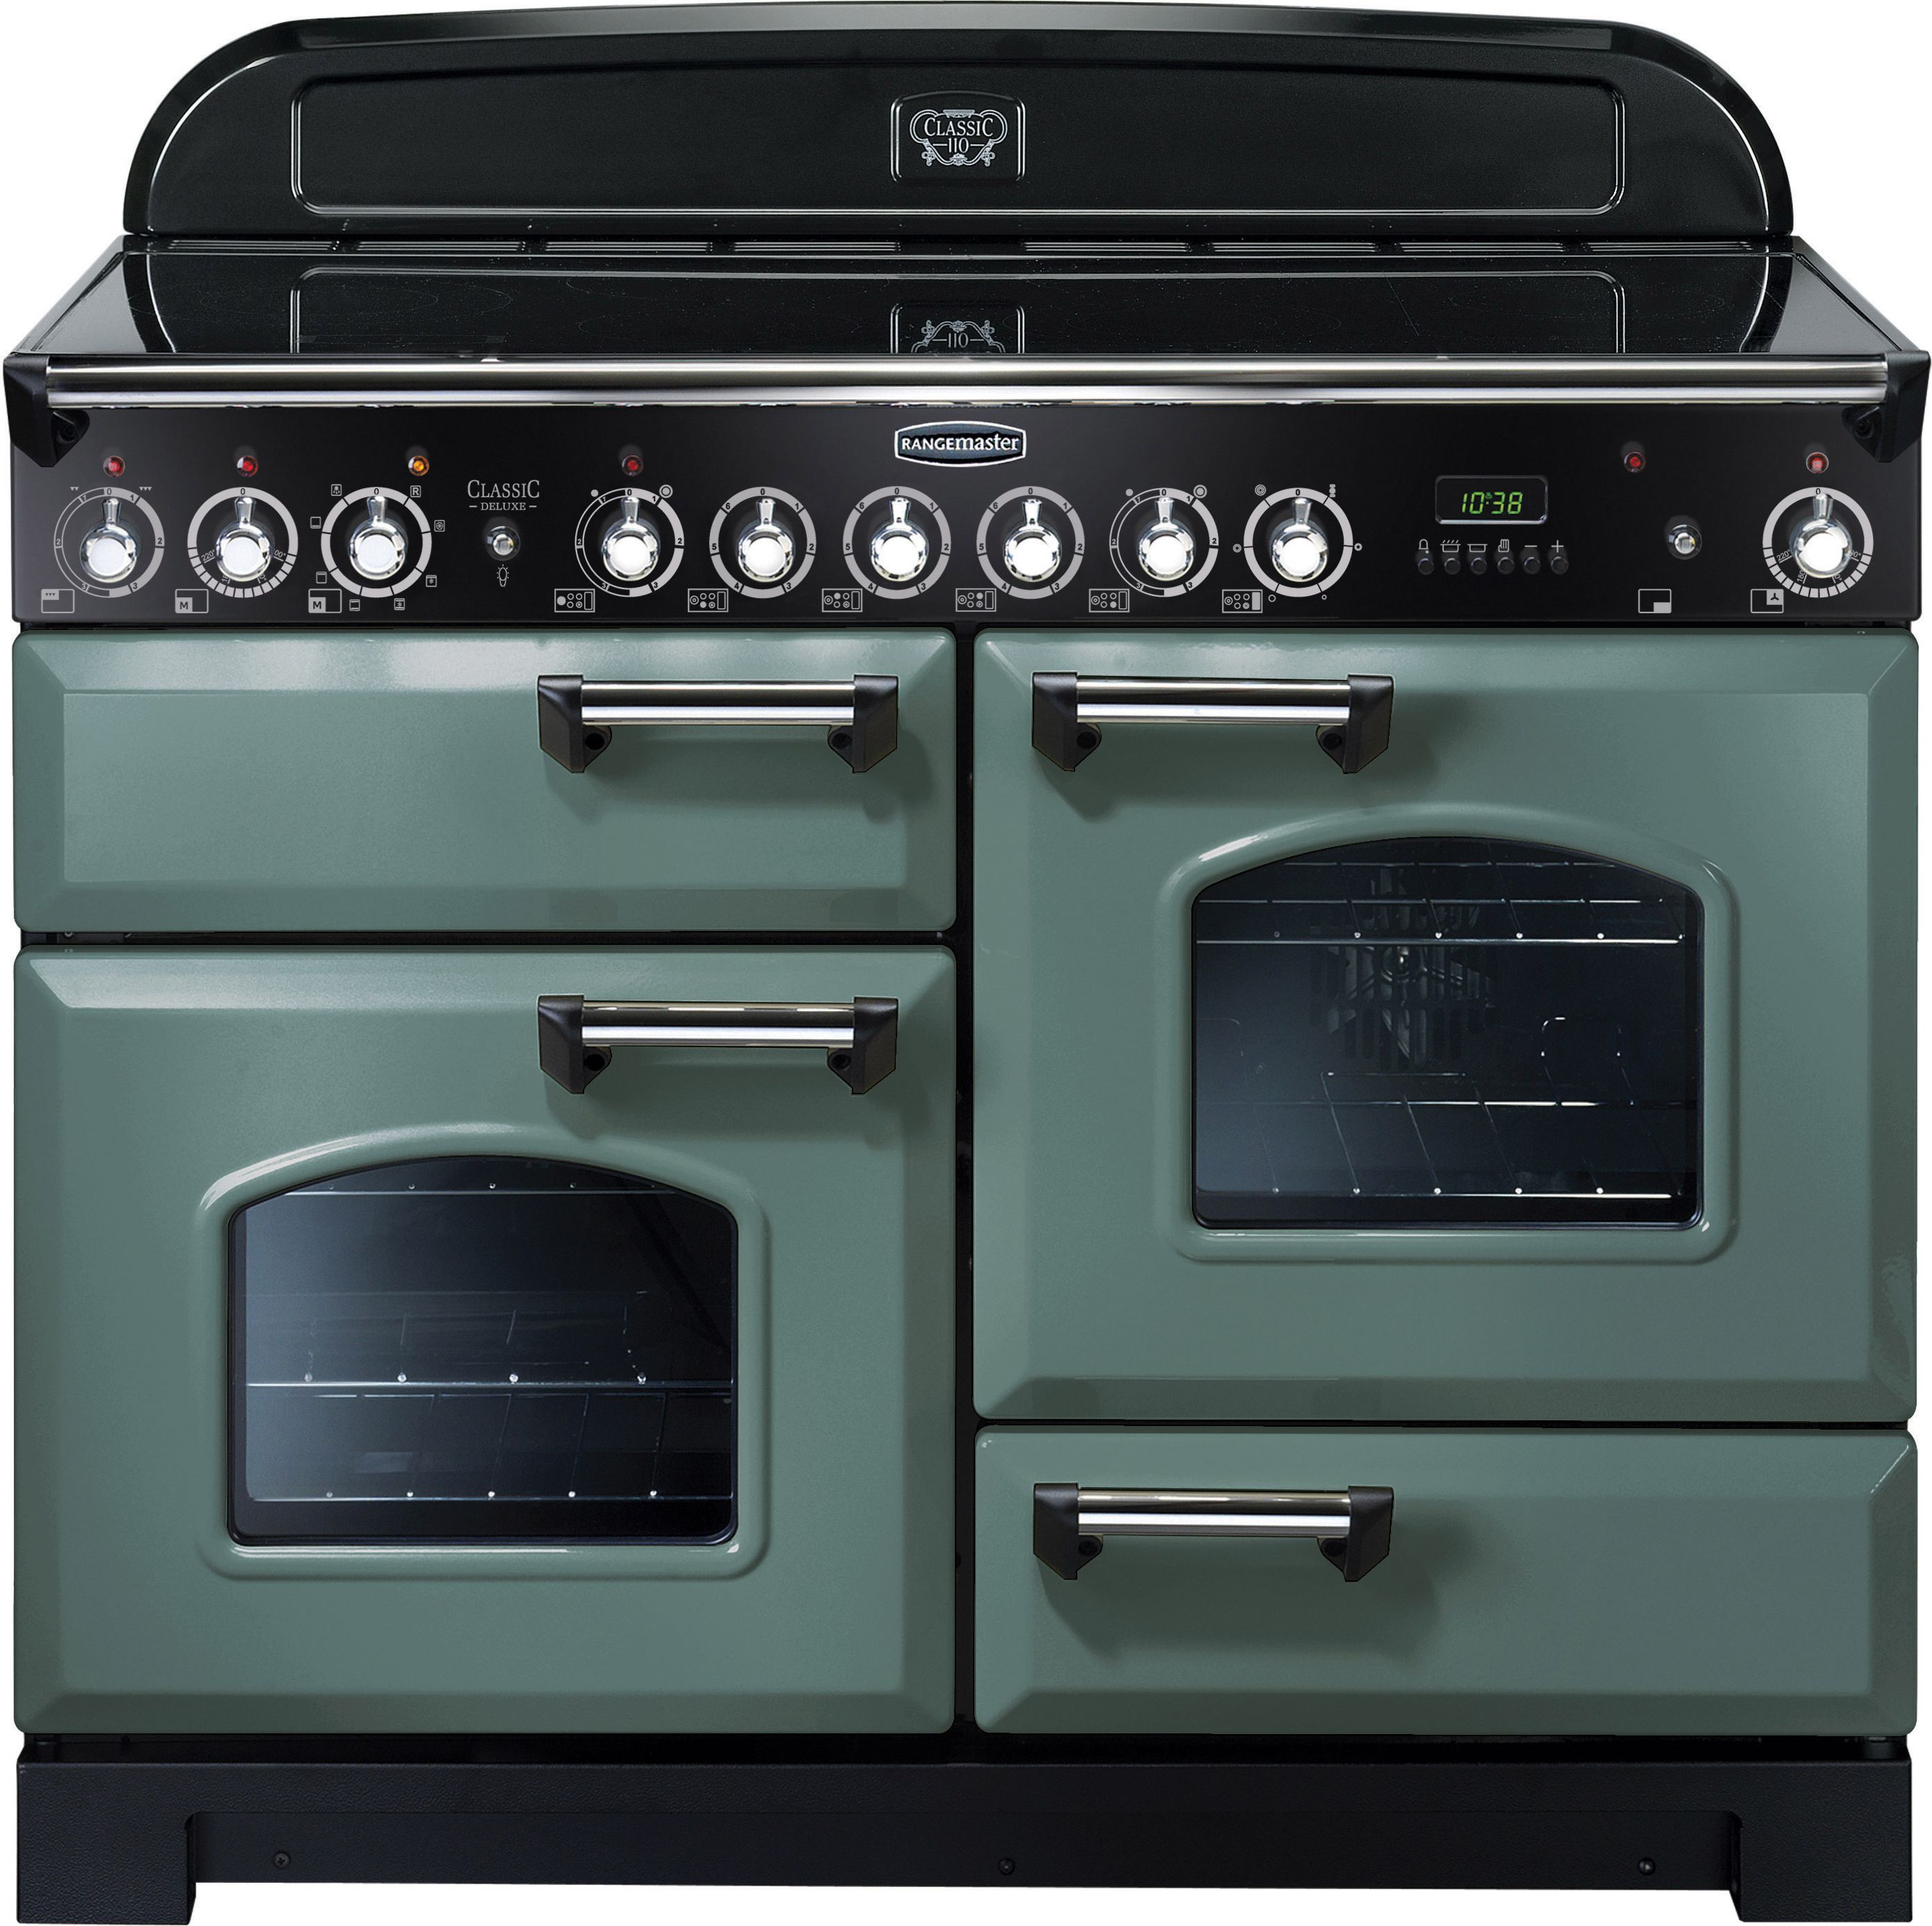 Rangemaster Classic Deluxe CDL110ECMG/C 110cm Electric Range Cooker with Ceramic Hob - Mineral Green / Chrome - A/A Rated, Green